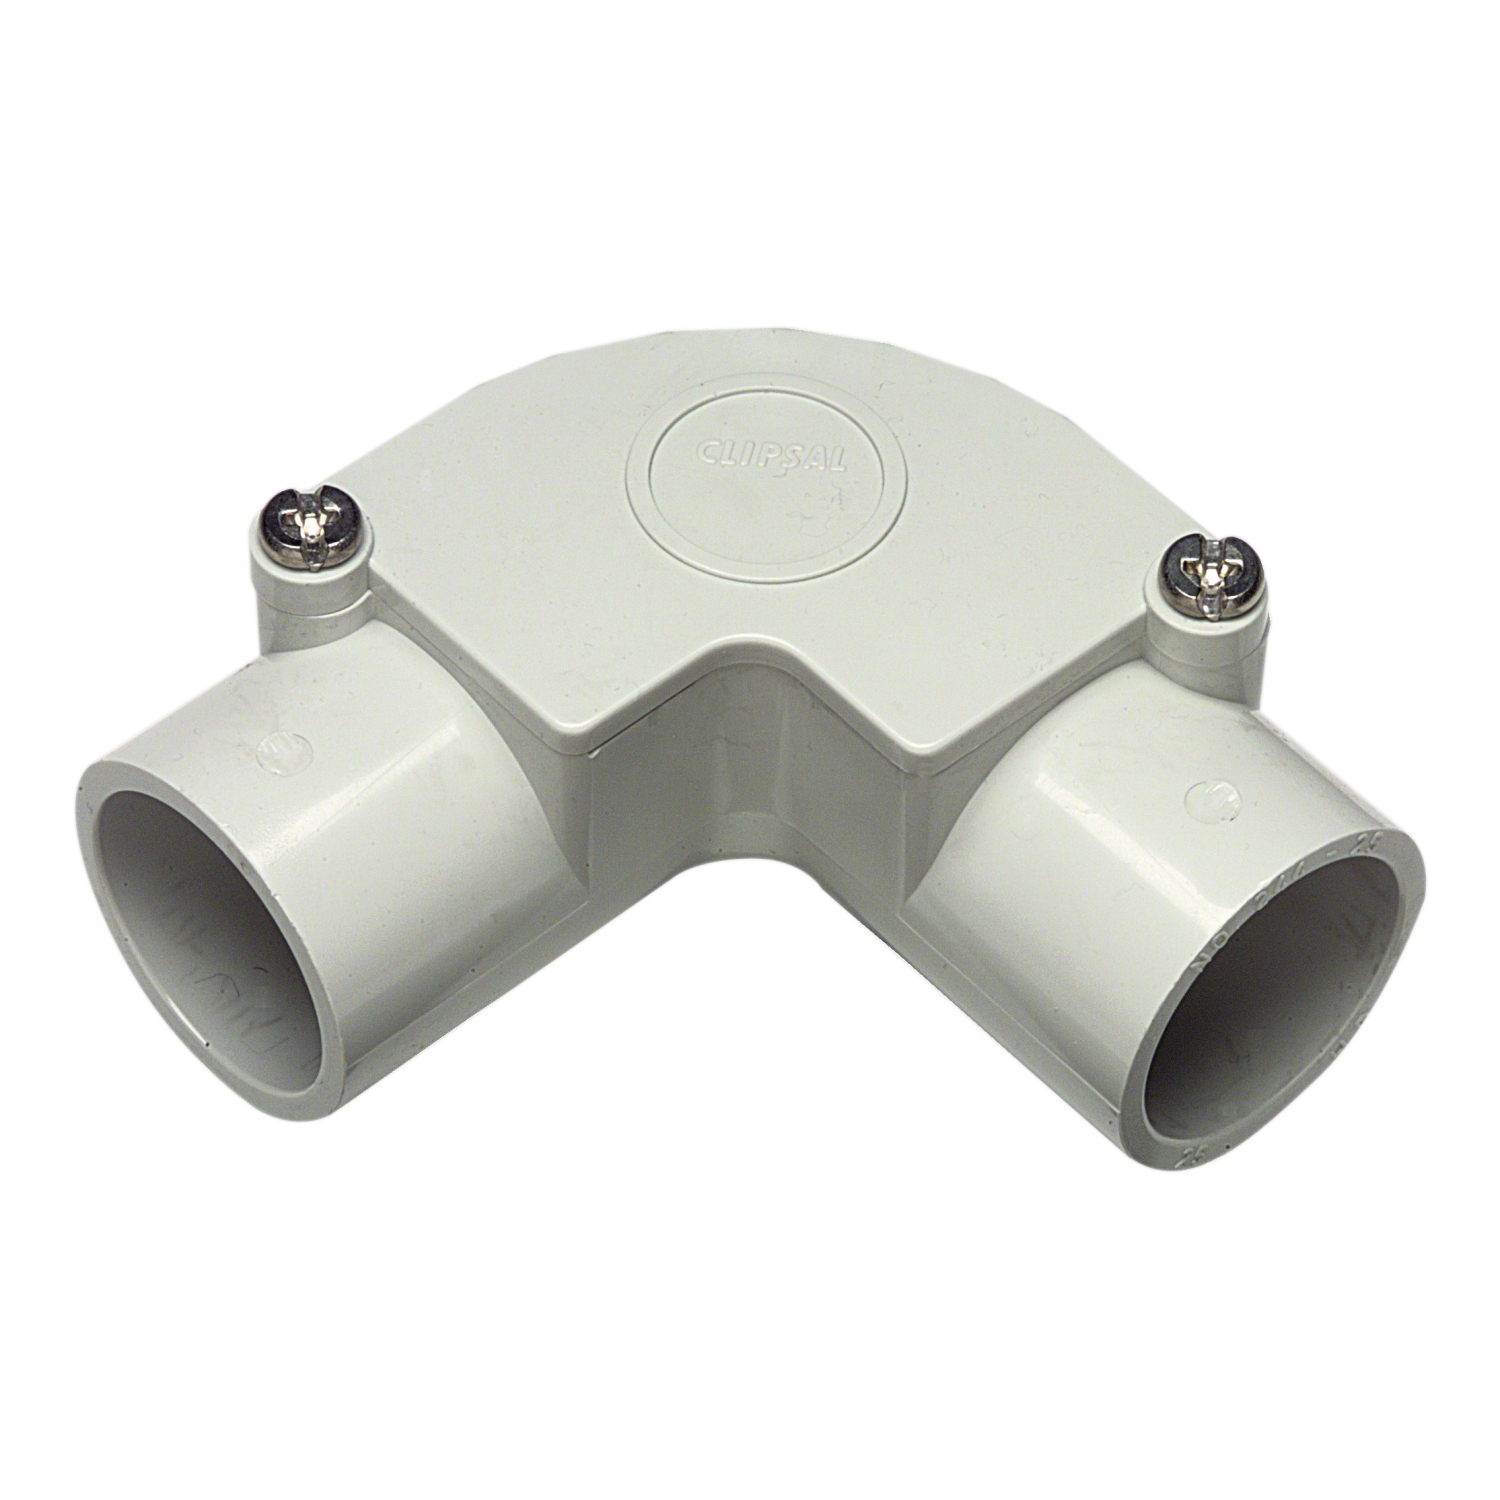 Inspection Fittings - PVC, Inspection Elbows, 32mm, Grey